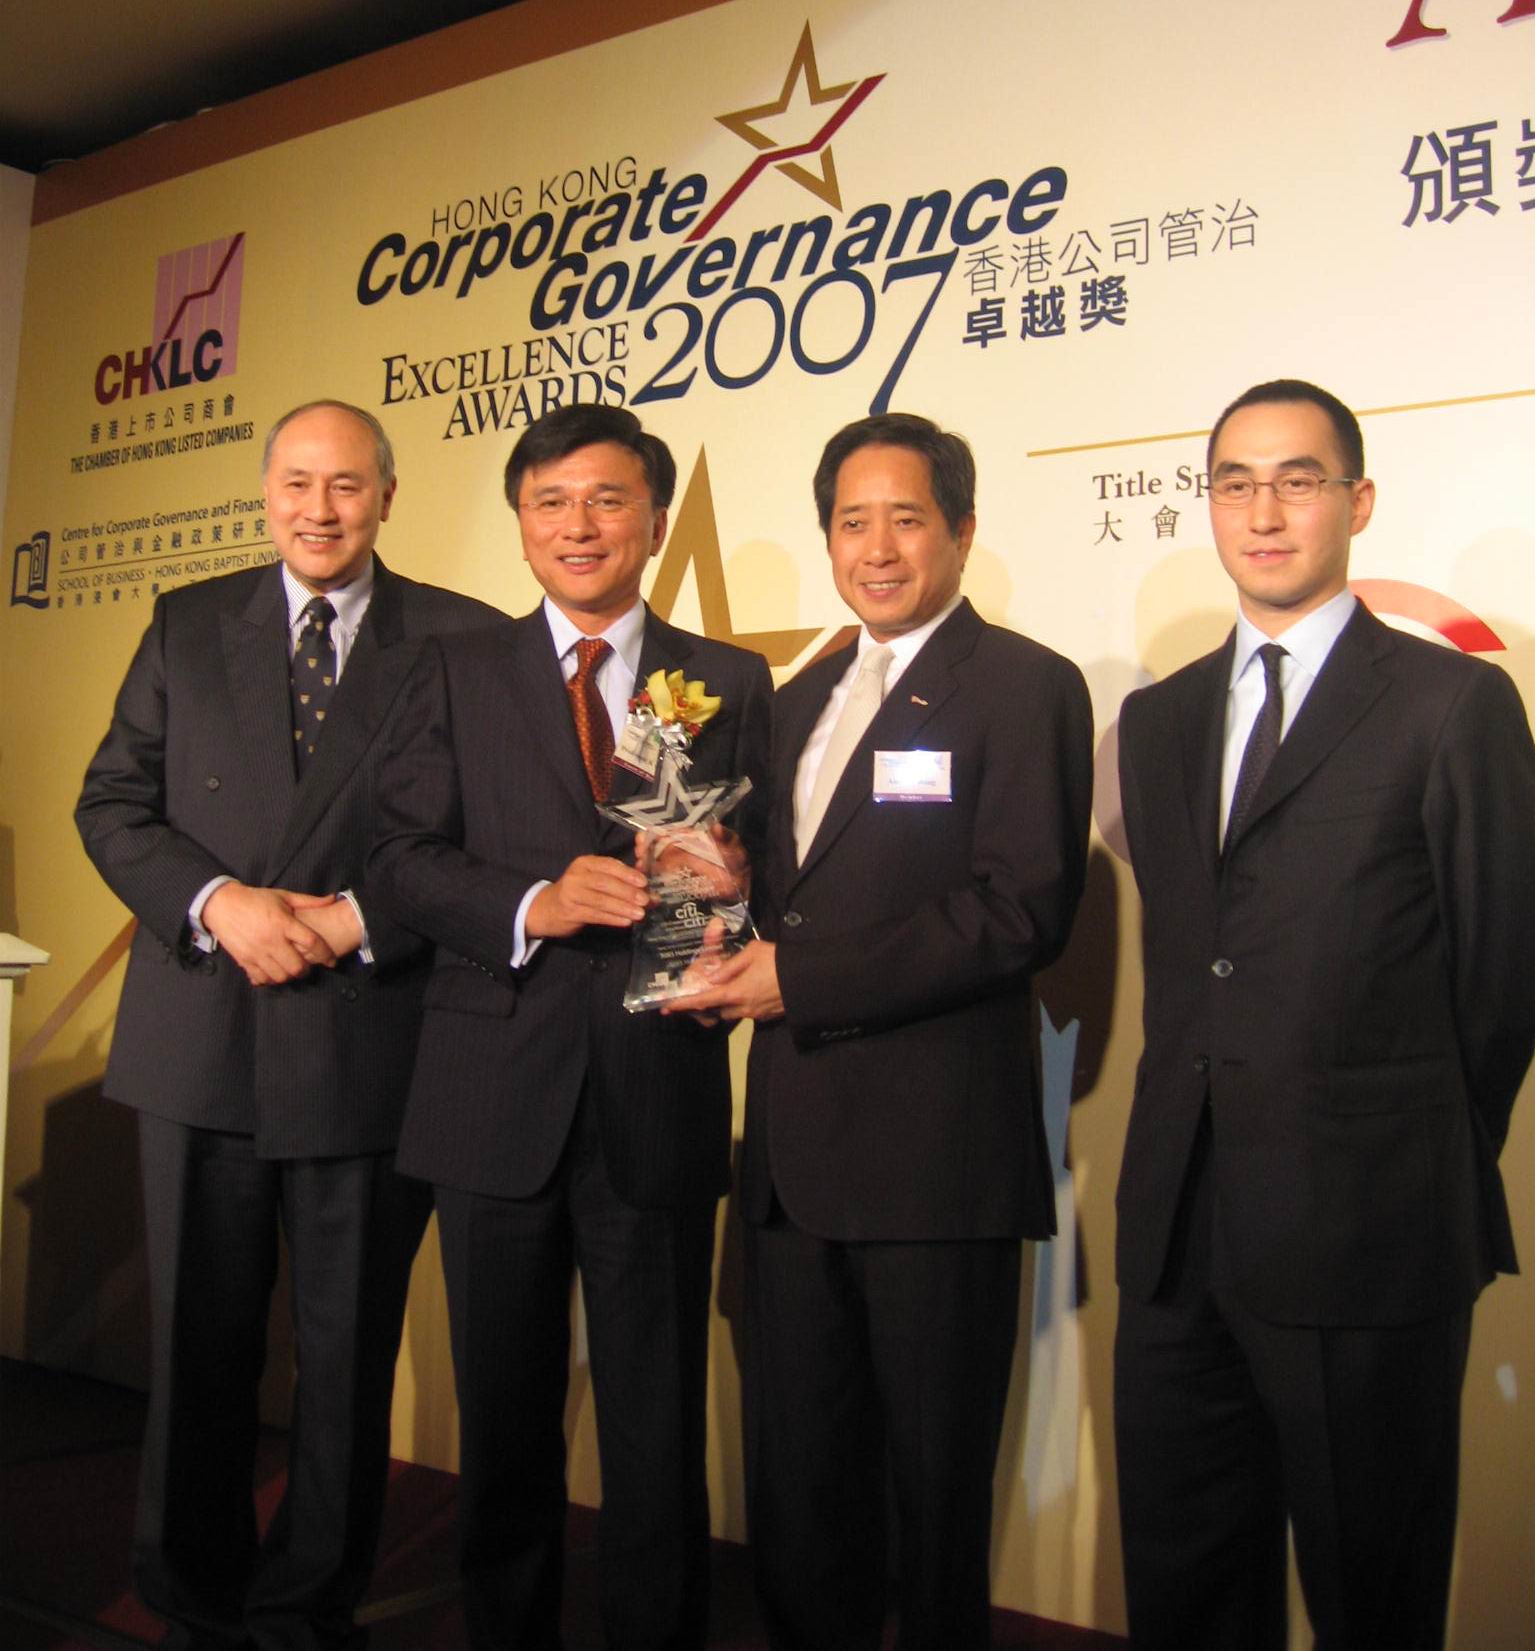 NWS Holdings honoured Hong Kong Corporate Governance Excellence Awards